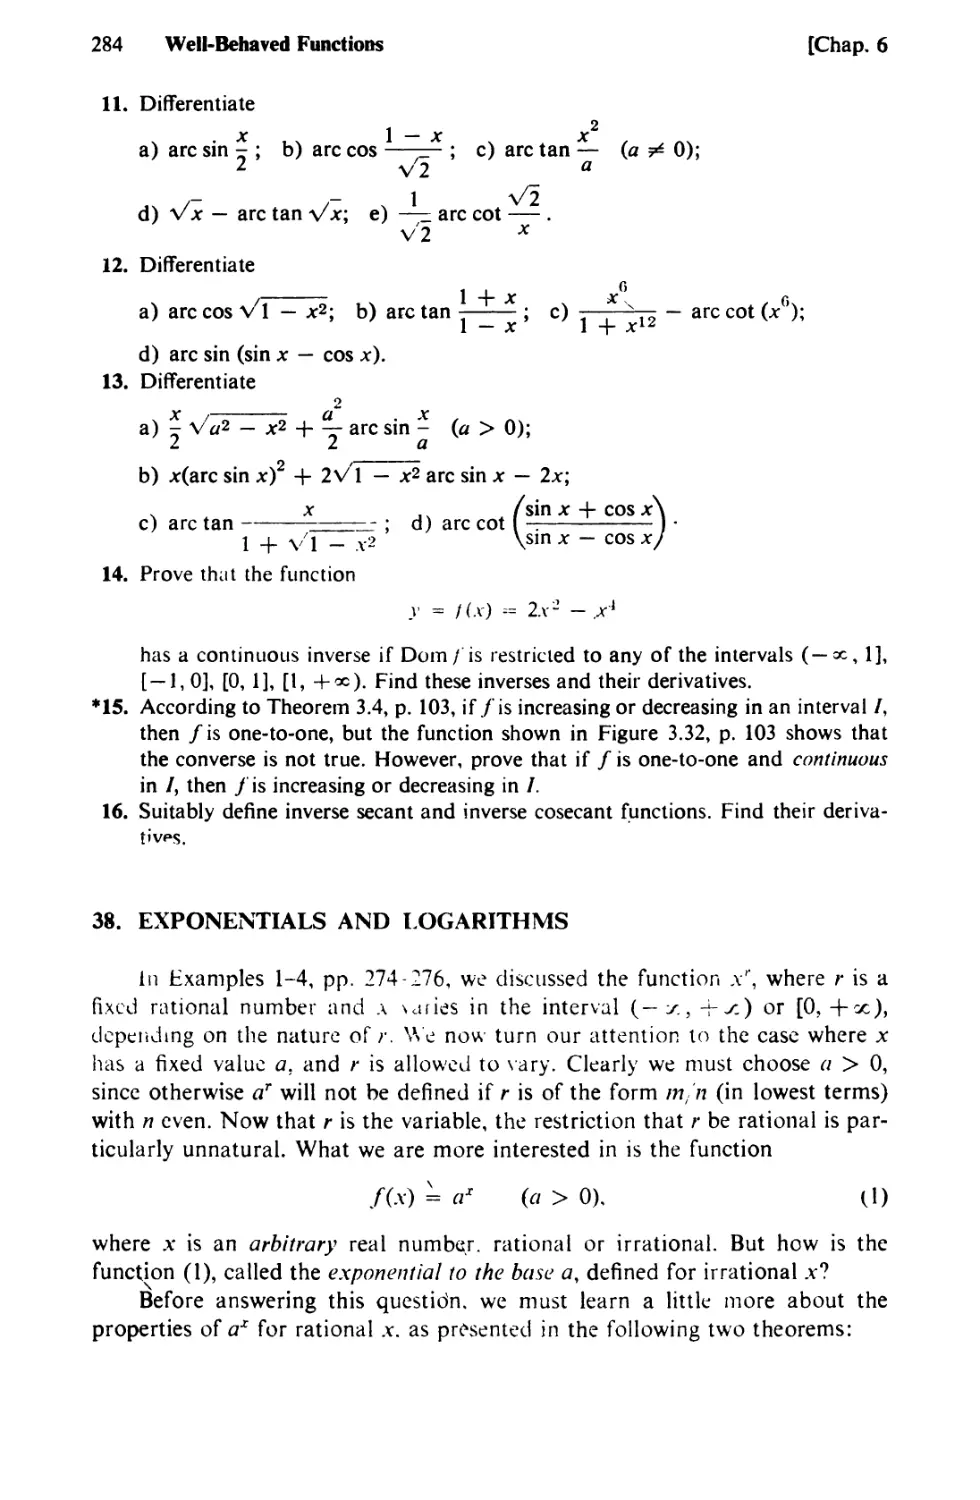 38. Exponentials and Logarithms